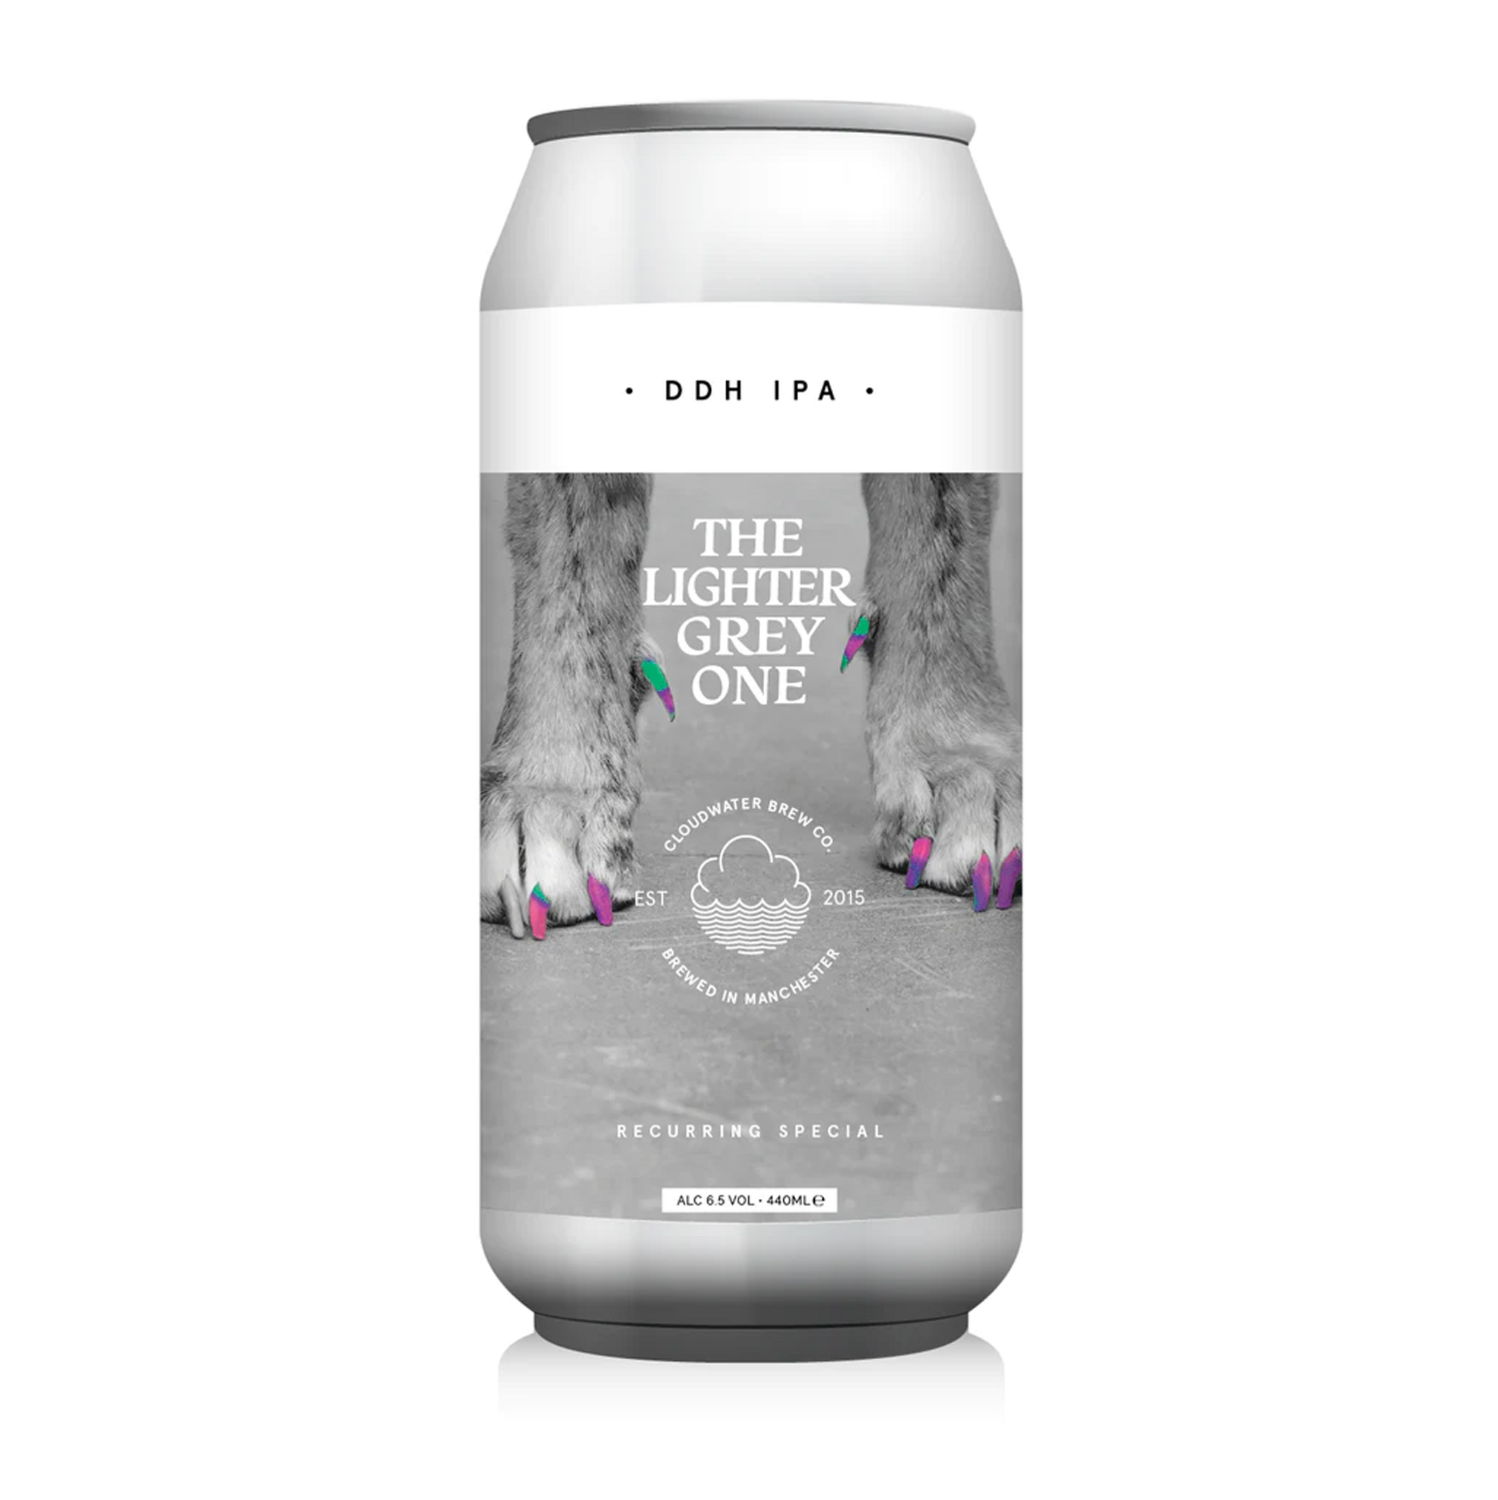 Cloudwater The LIGHTER Grey One DDH IPA